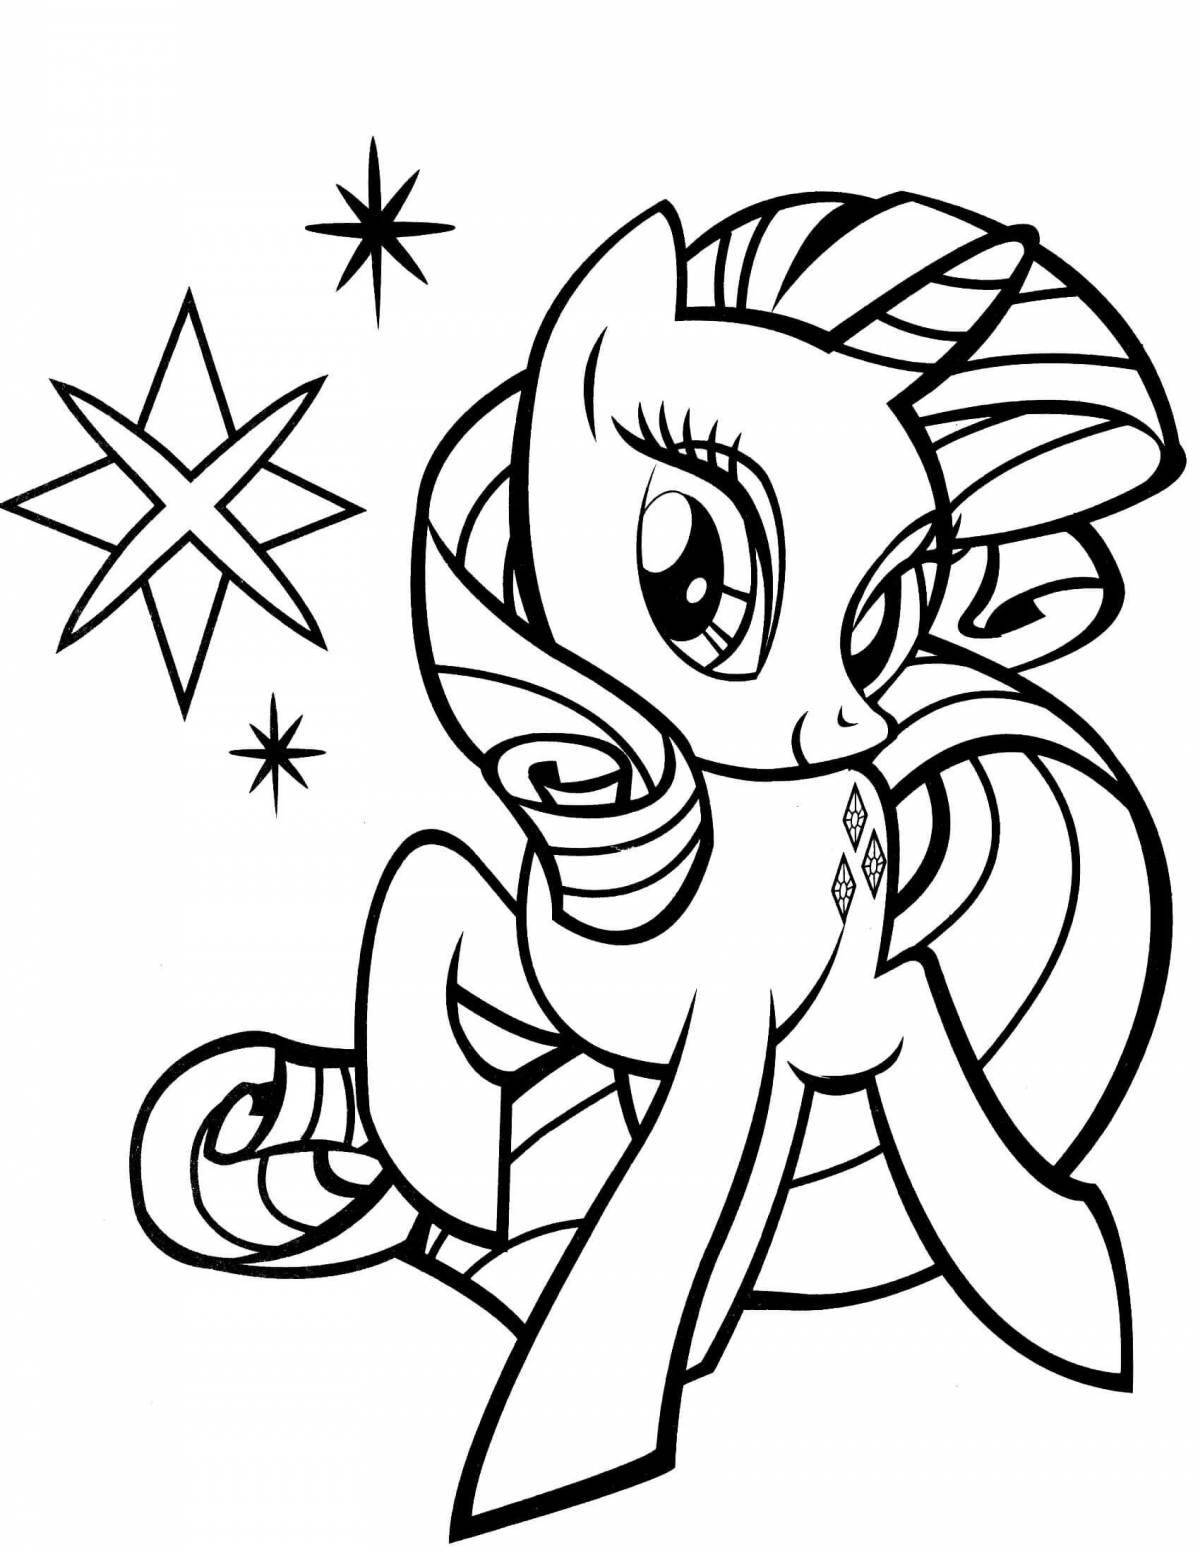 Playful little pony coloring for kids